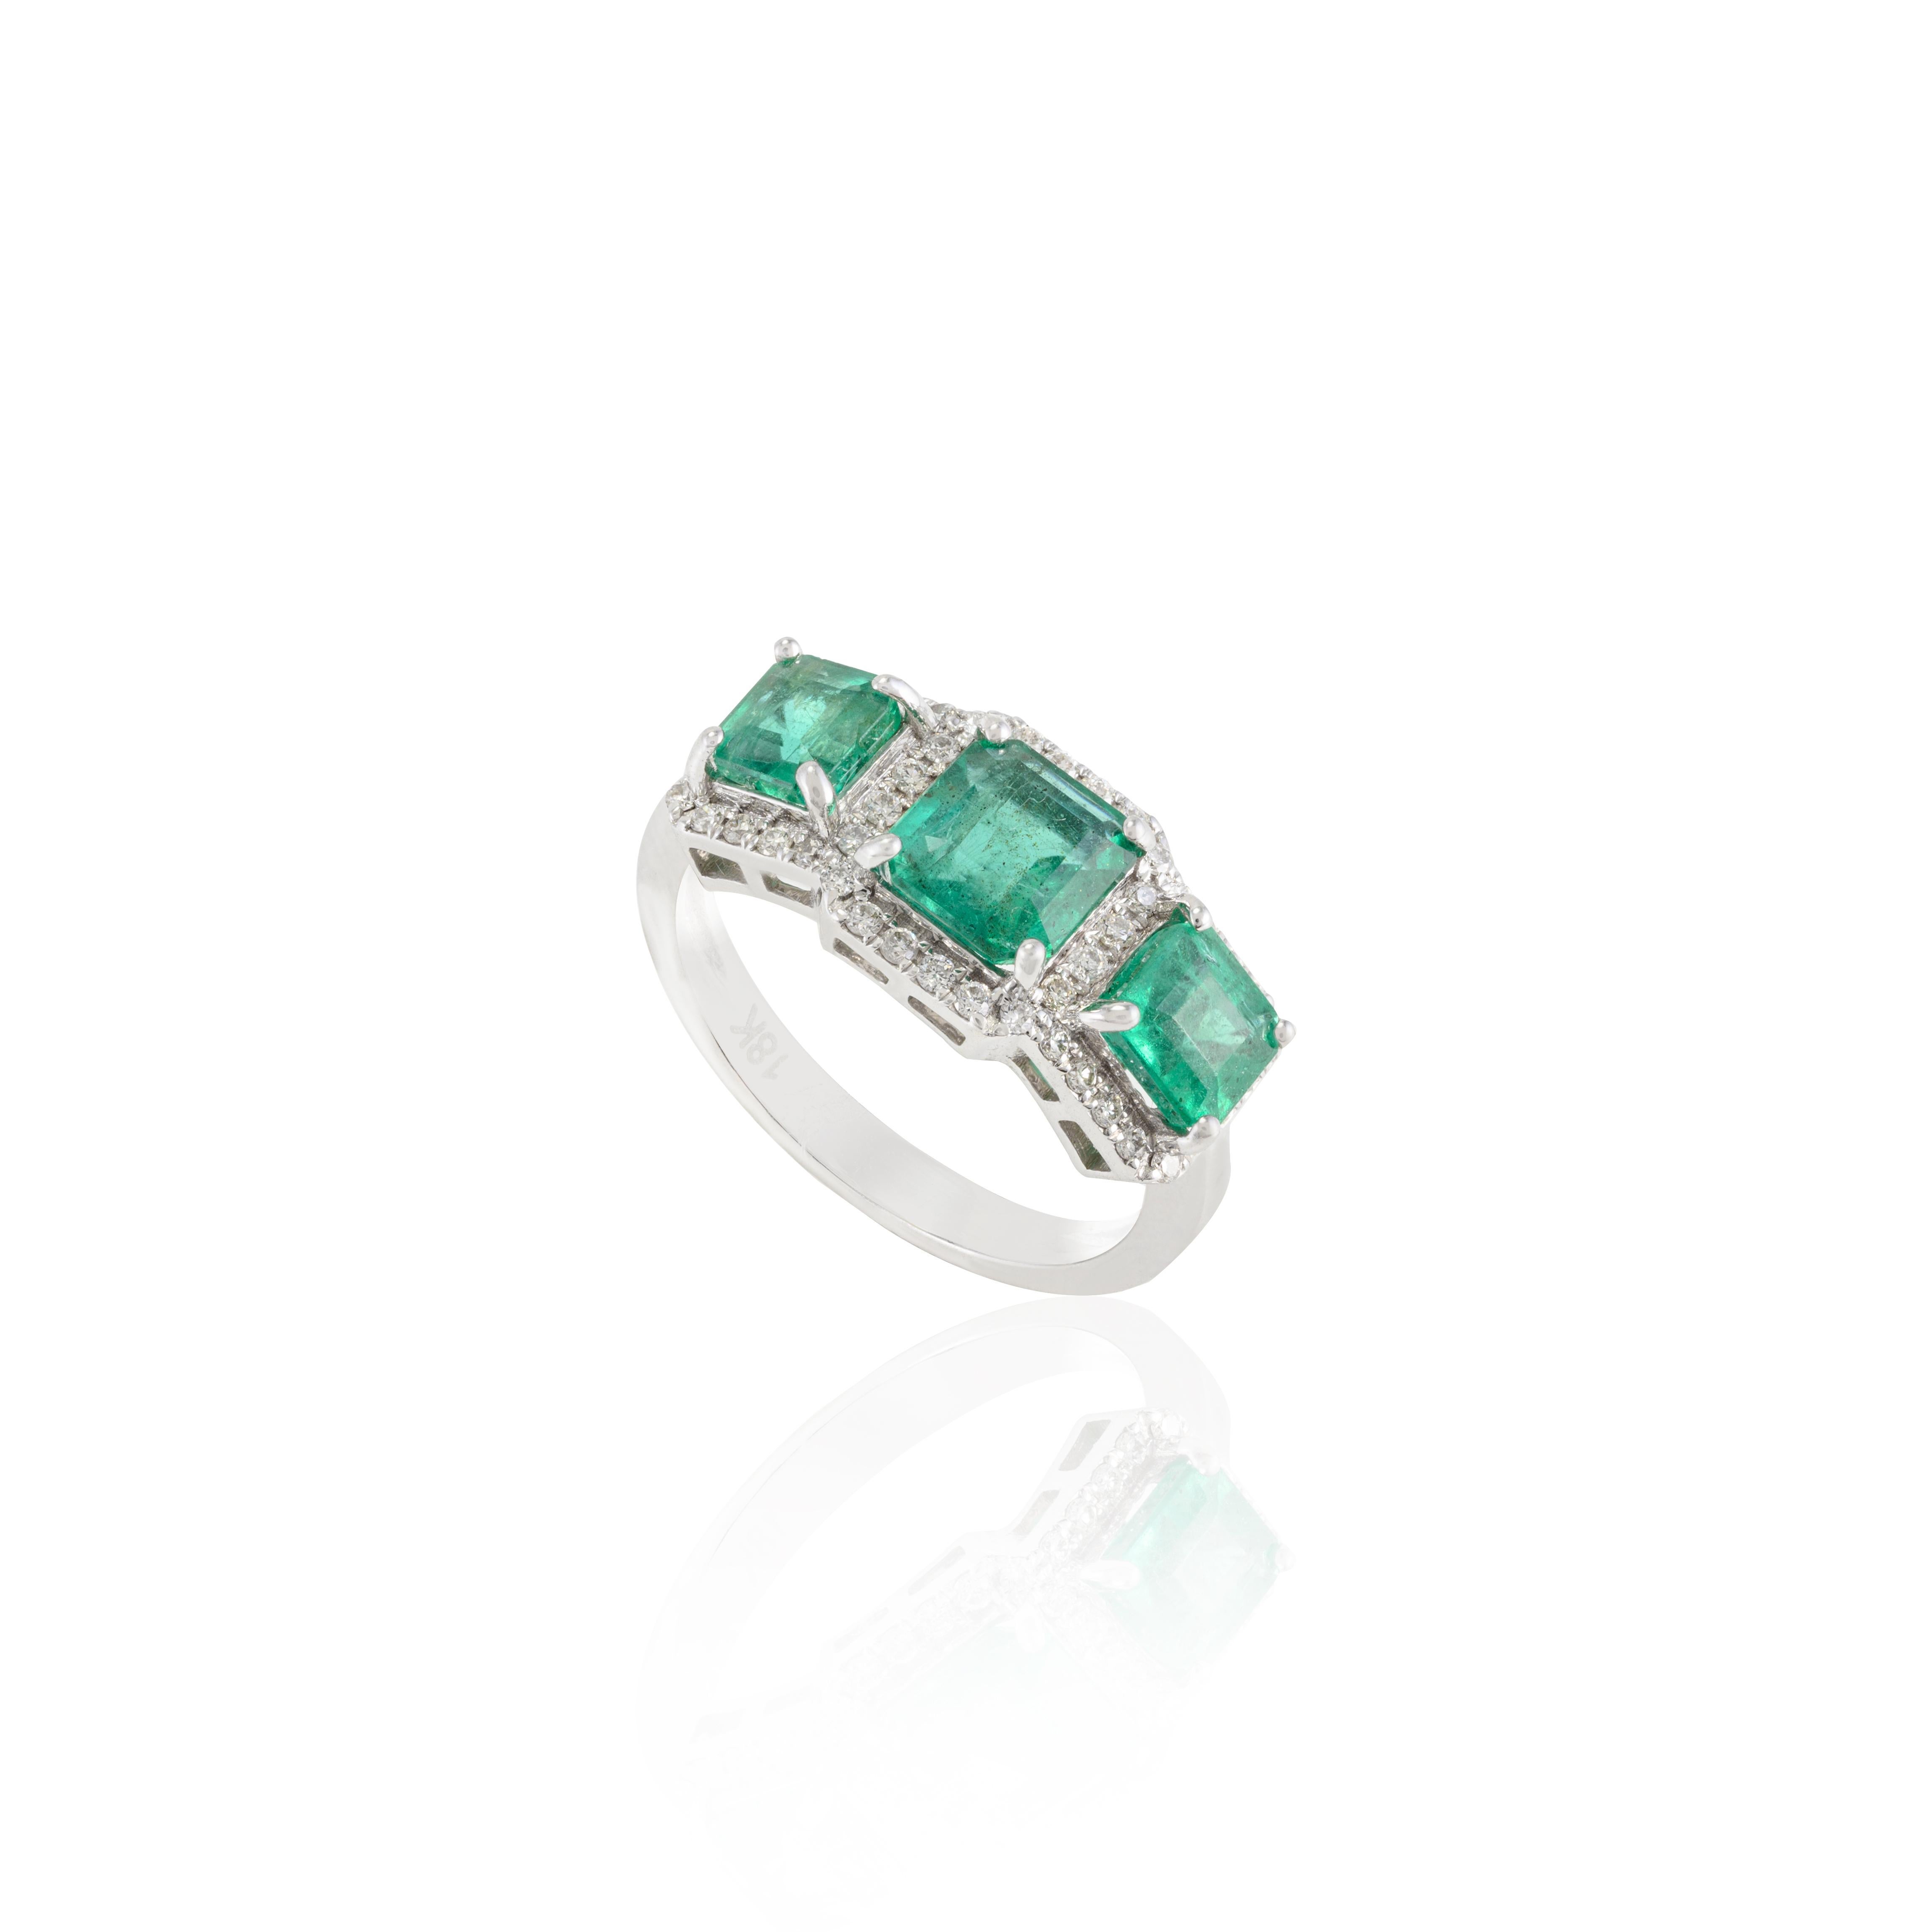 For Sale:  Three Stone Genuine Emerald Ring with Halo Diamond in 18k Solid White Gold 8